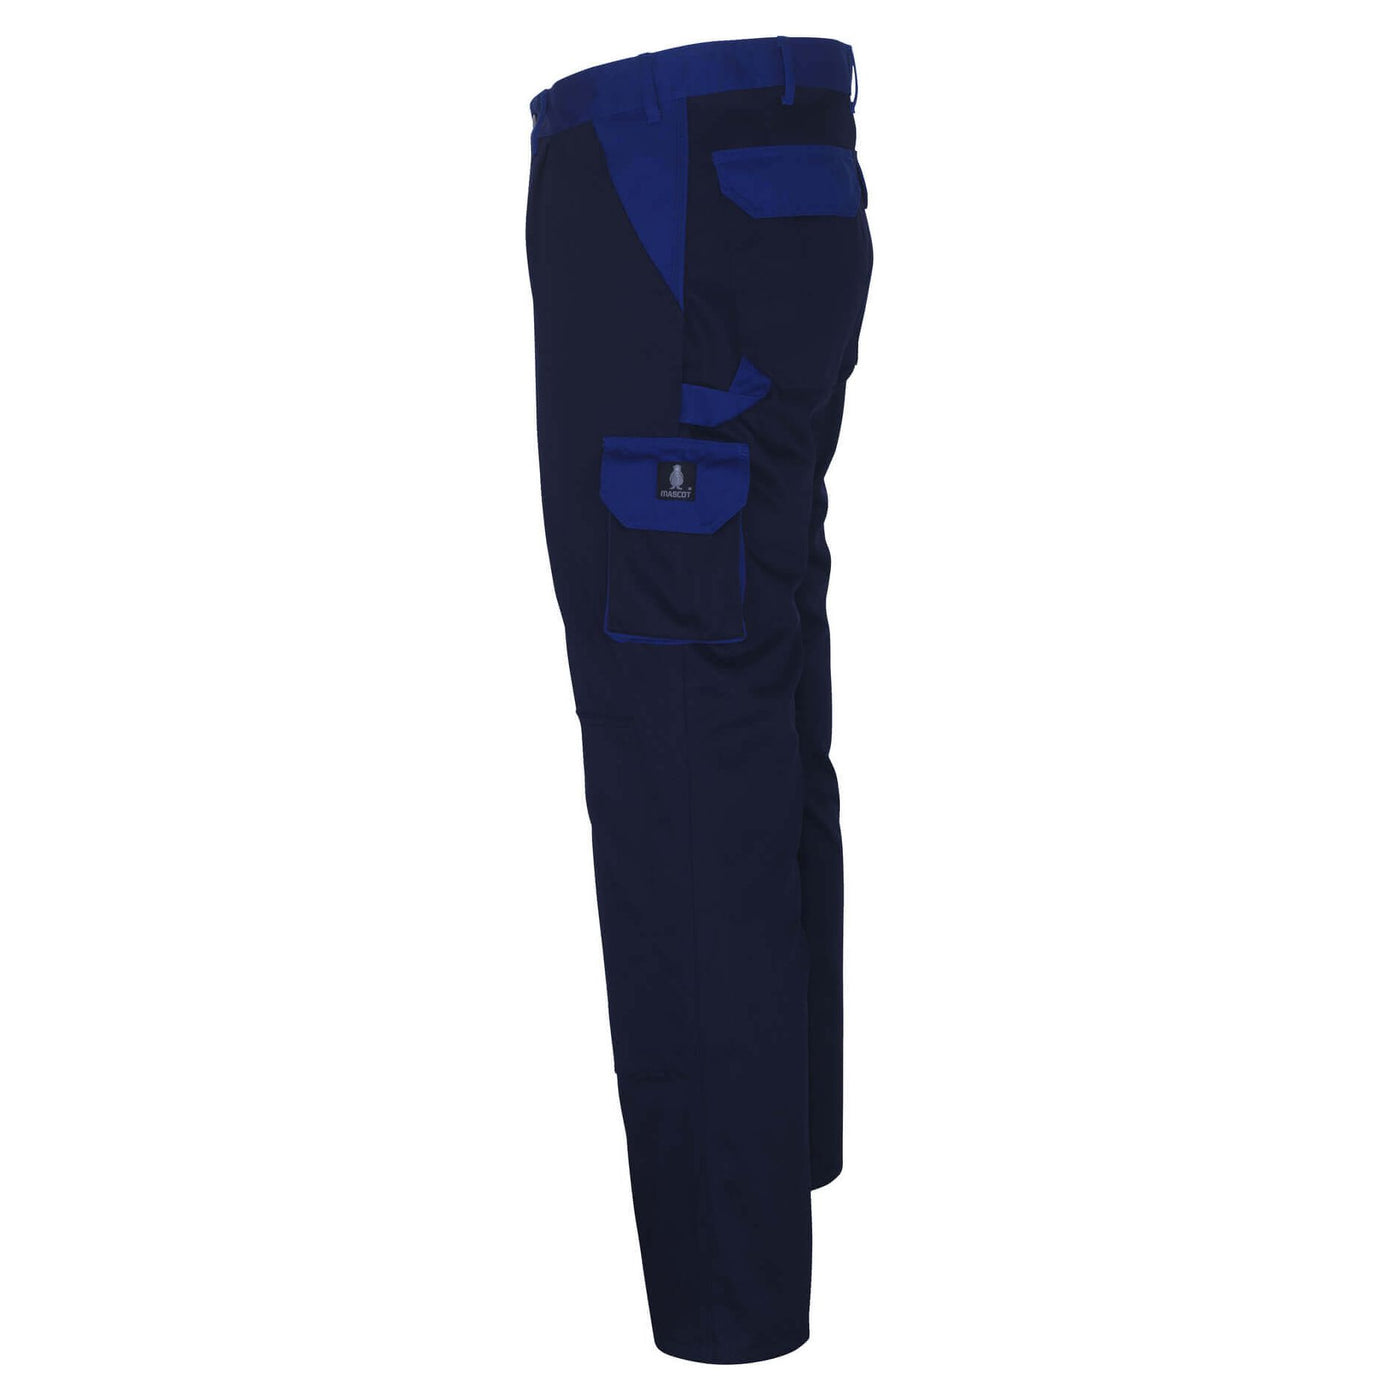 Mascot Torino Work Trousers 00979-430 Right #colour_navy-blue-royal-blue